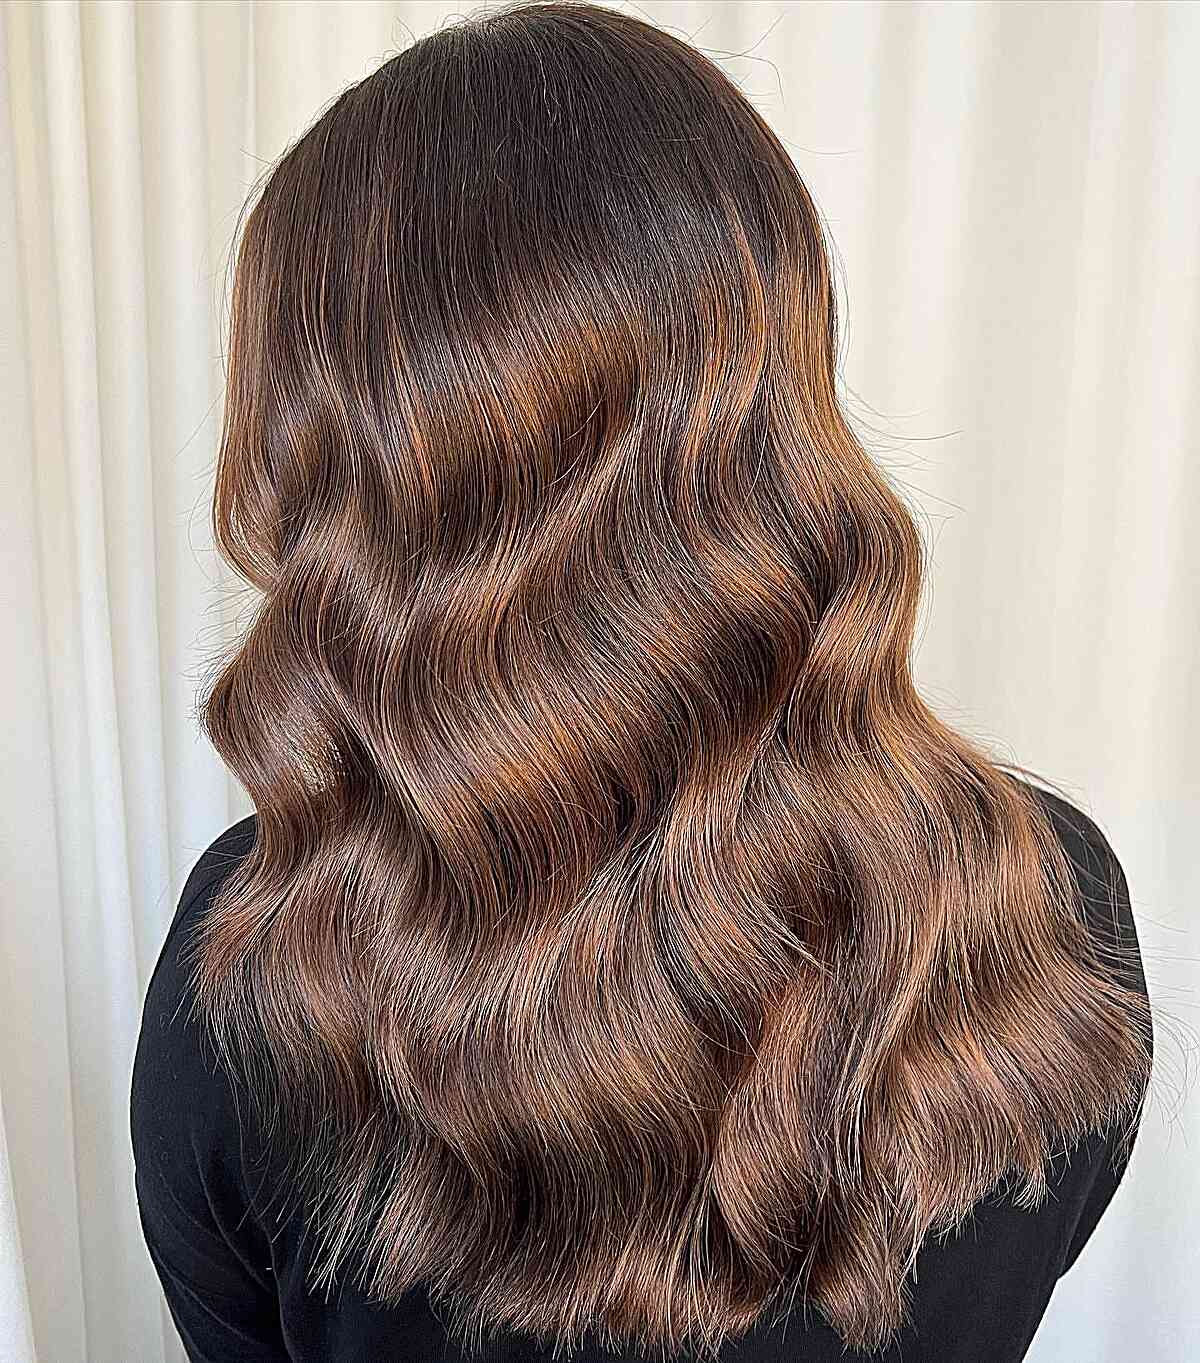 Long Shiny Brown Hair with Soft Waves